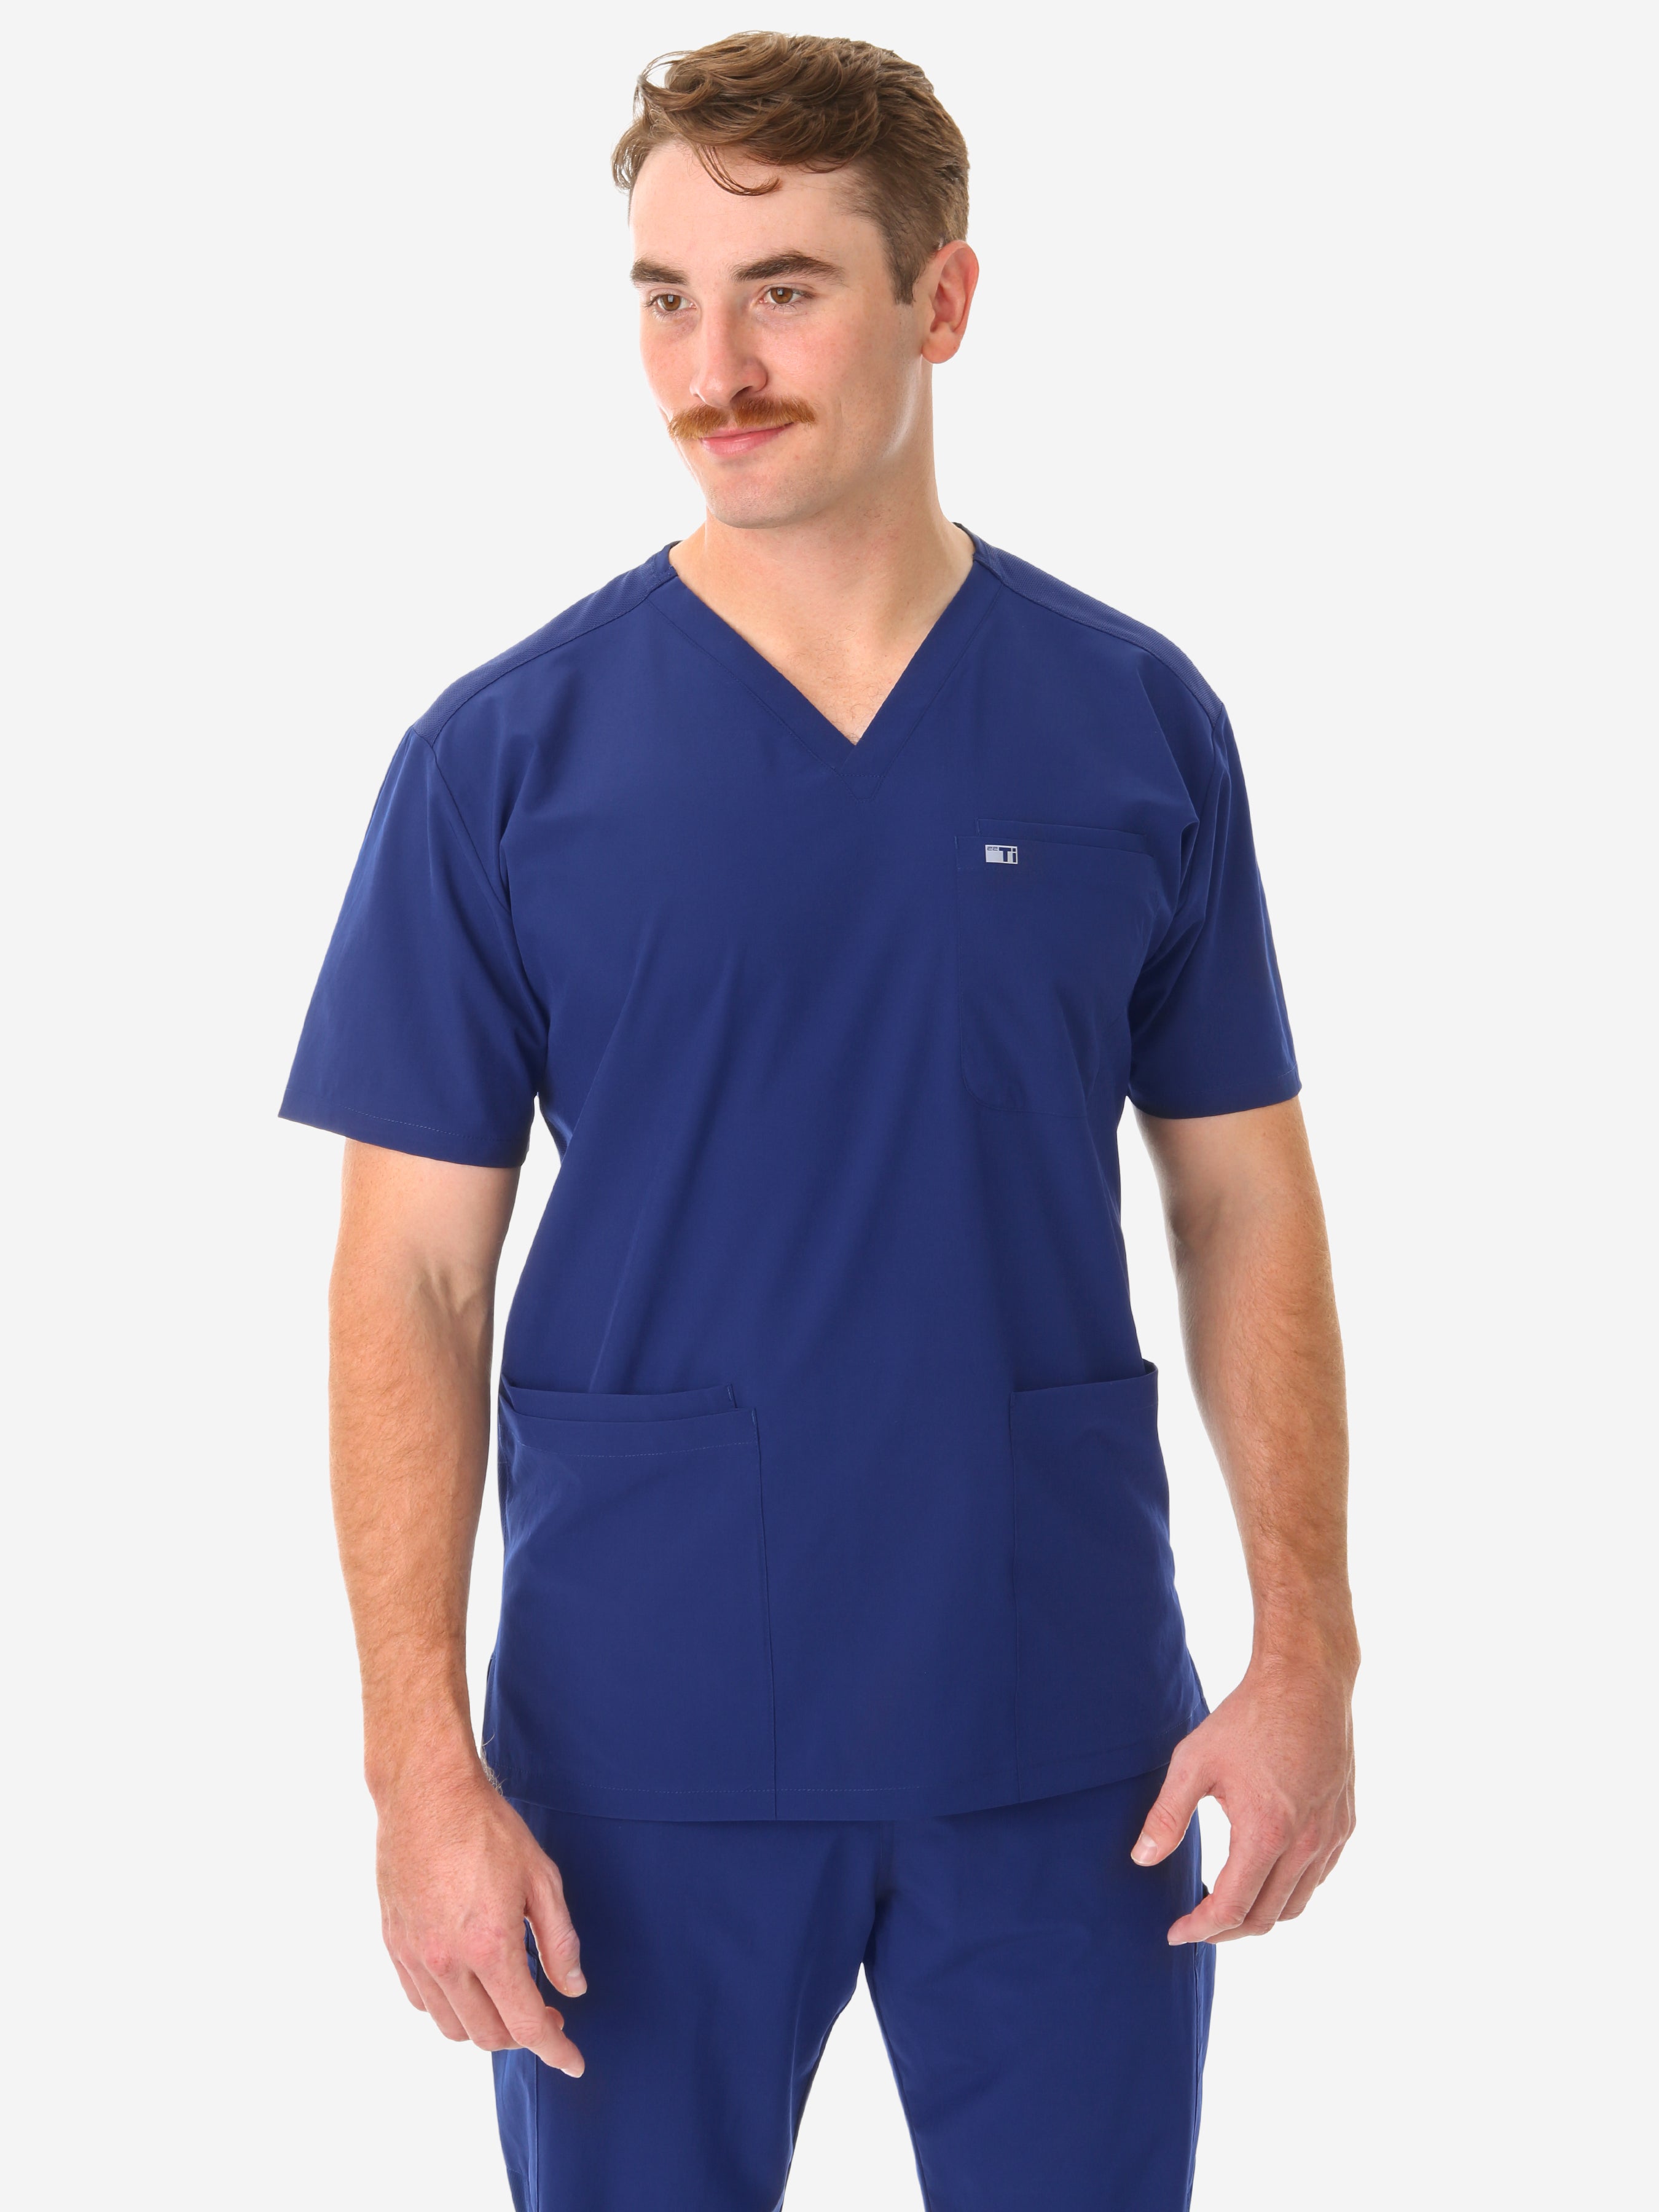 Men's Navy Blue Five-Pocket Scrub Top Only Front View